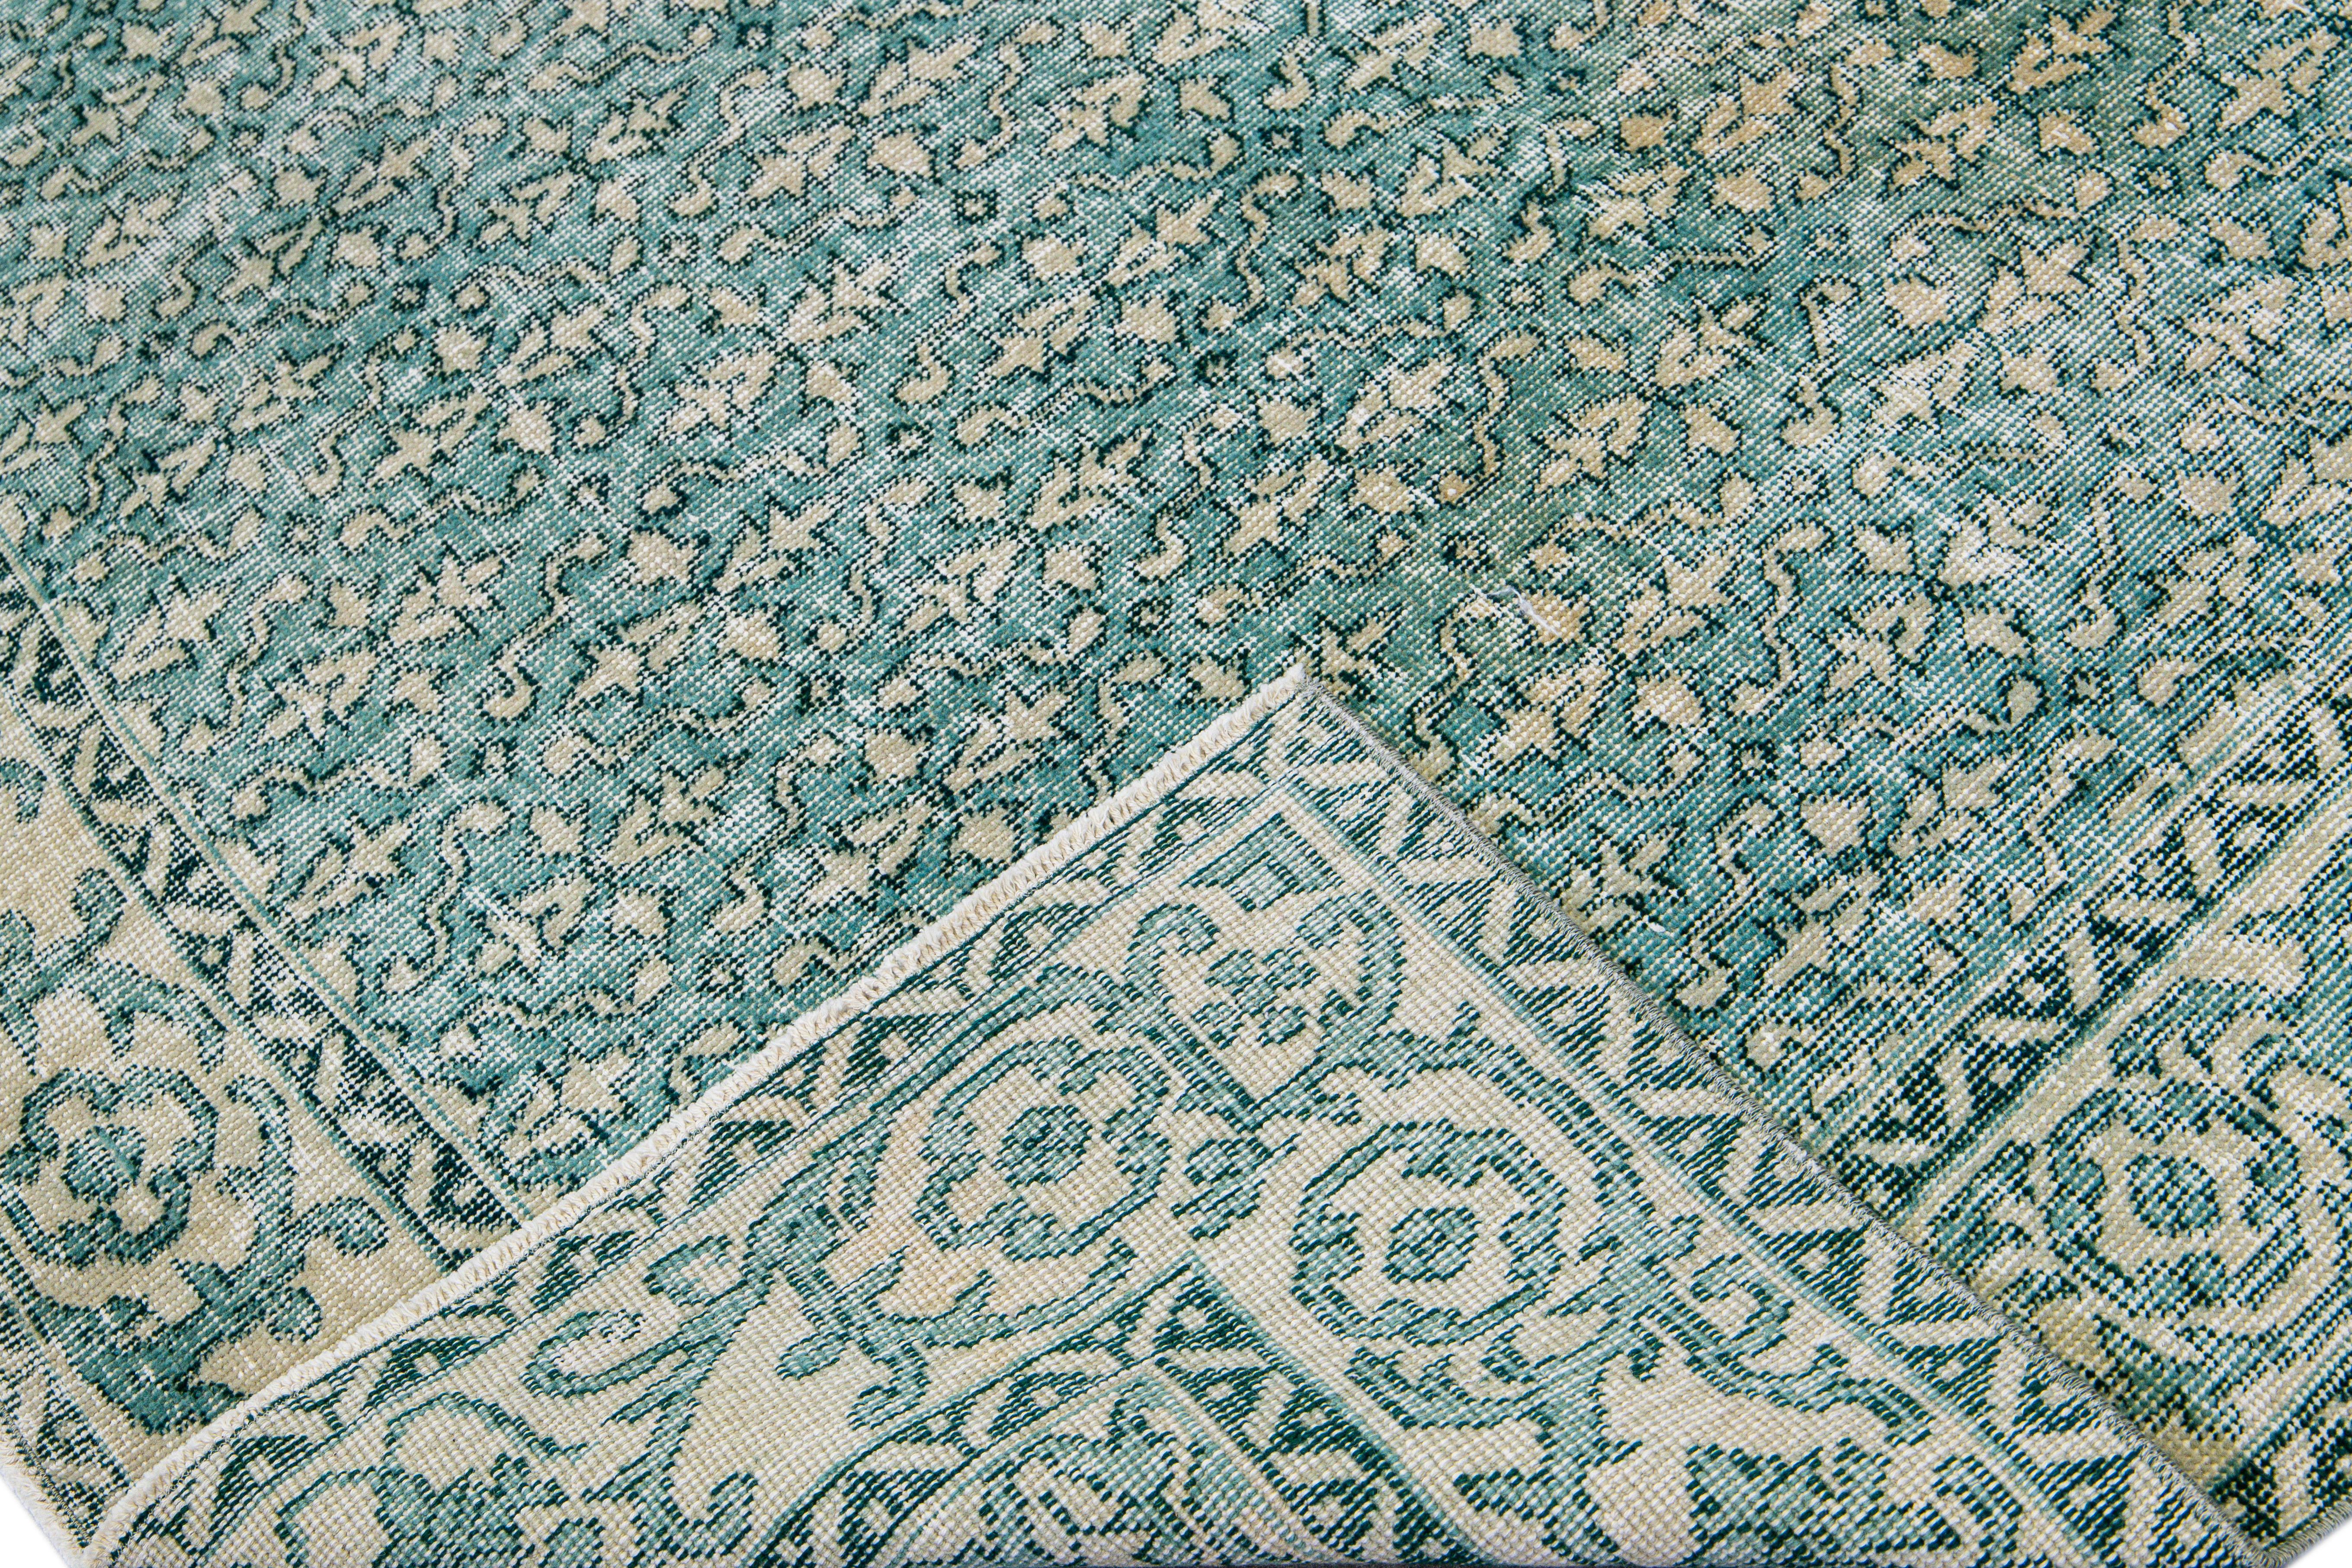 Beautiful vintage Deco Turkish hand-knotted wool rug with a teal field. This Turkish rug has a beige accent in a gorgeous all-over geometric floral pattern design.

This rug measures: 6'8